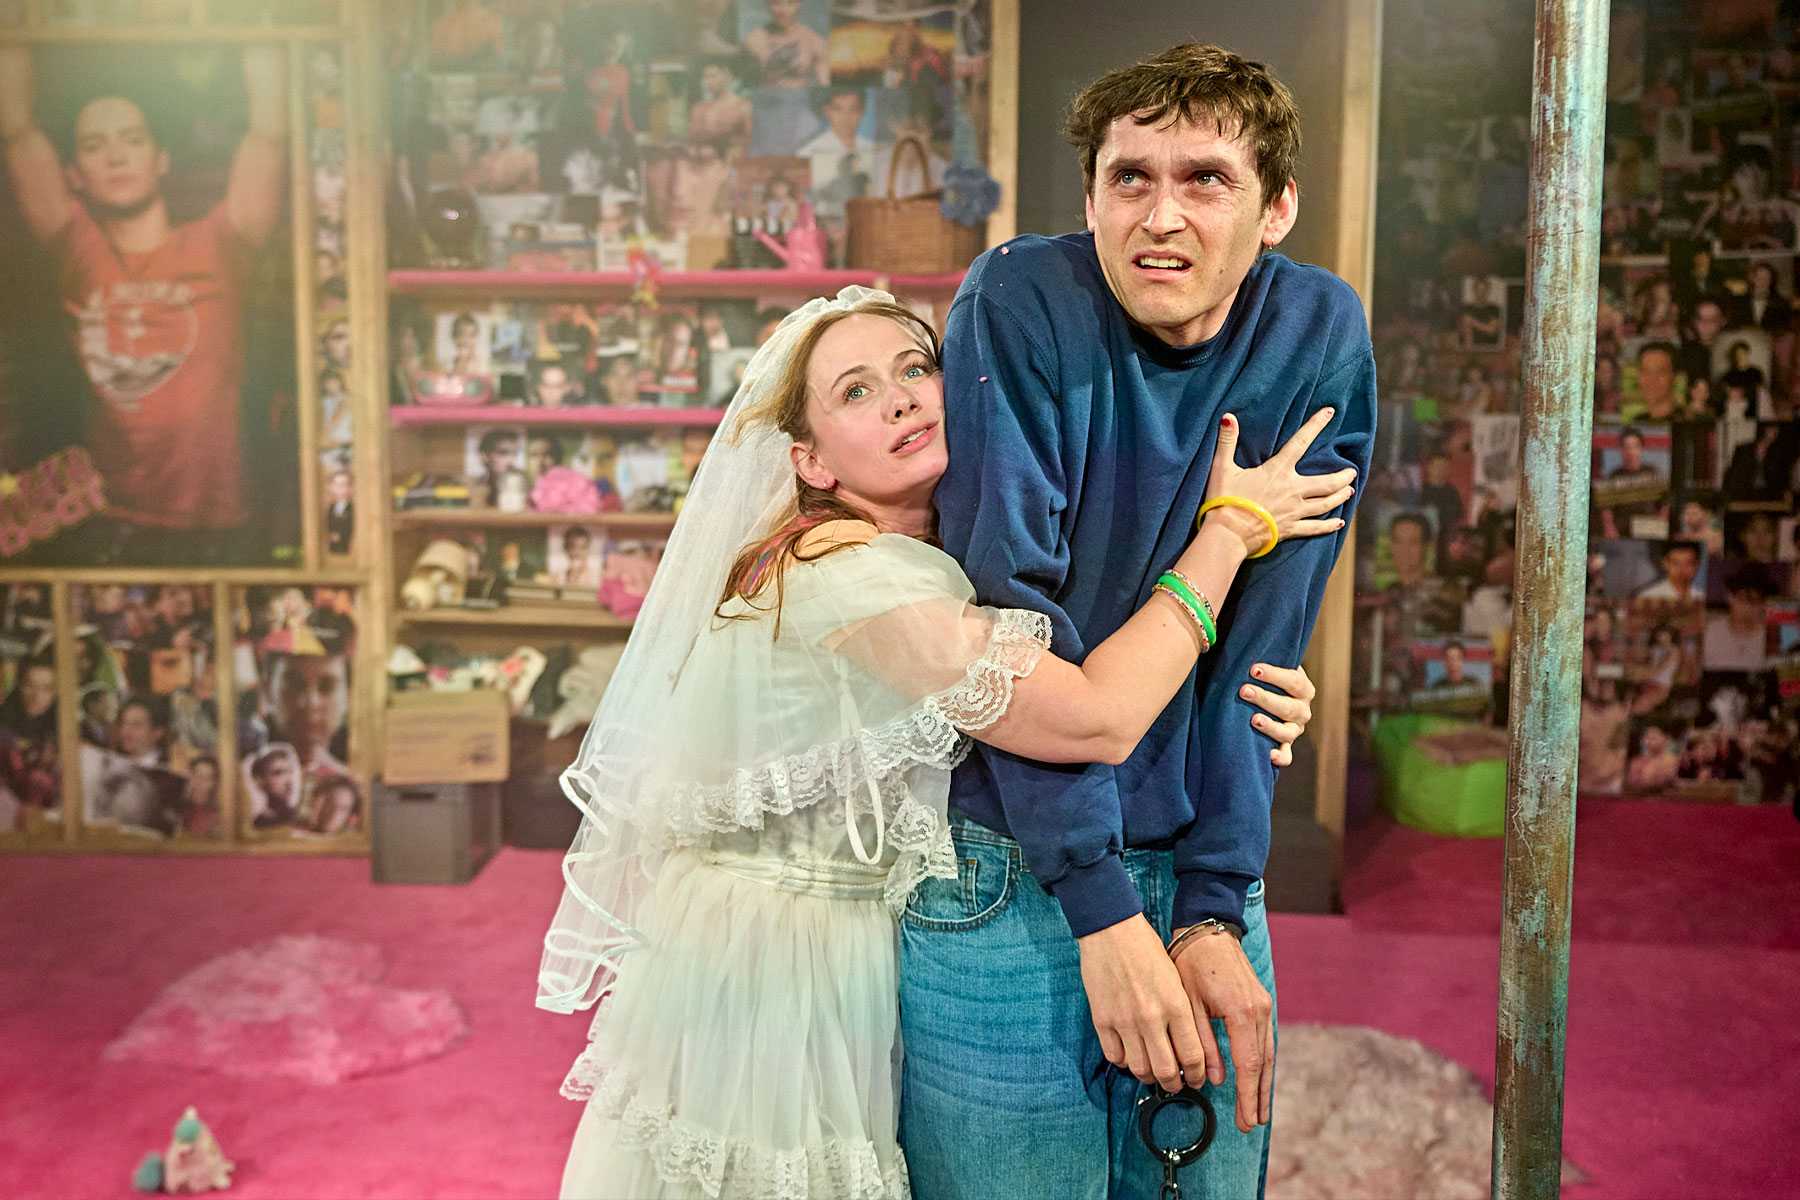 Tessa Albertson (as Shelby Hinkley) and Anders Hayward (as Tobey Maguire) in a scene from I'm Gonna Marry You Tobey Maguire at Southwark Playhouse Borough